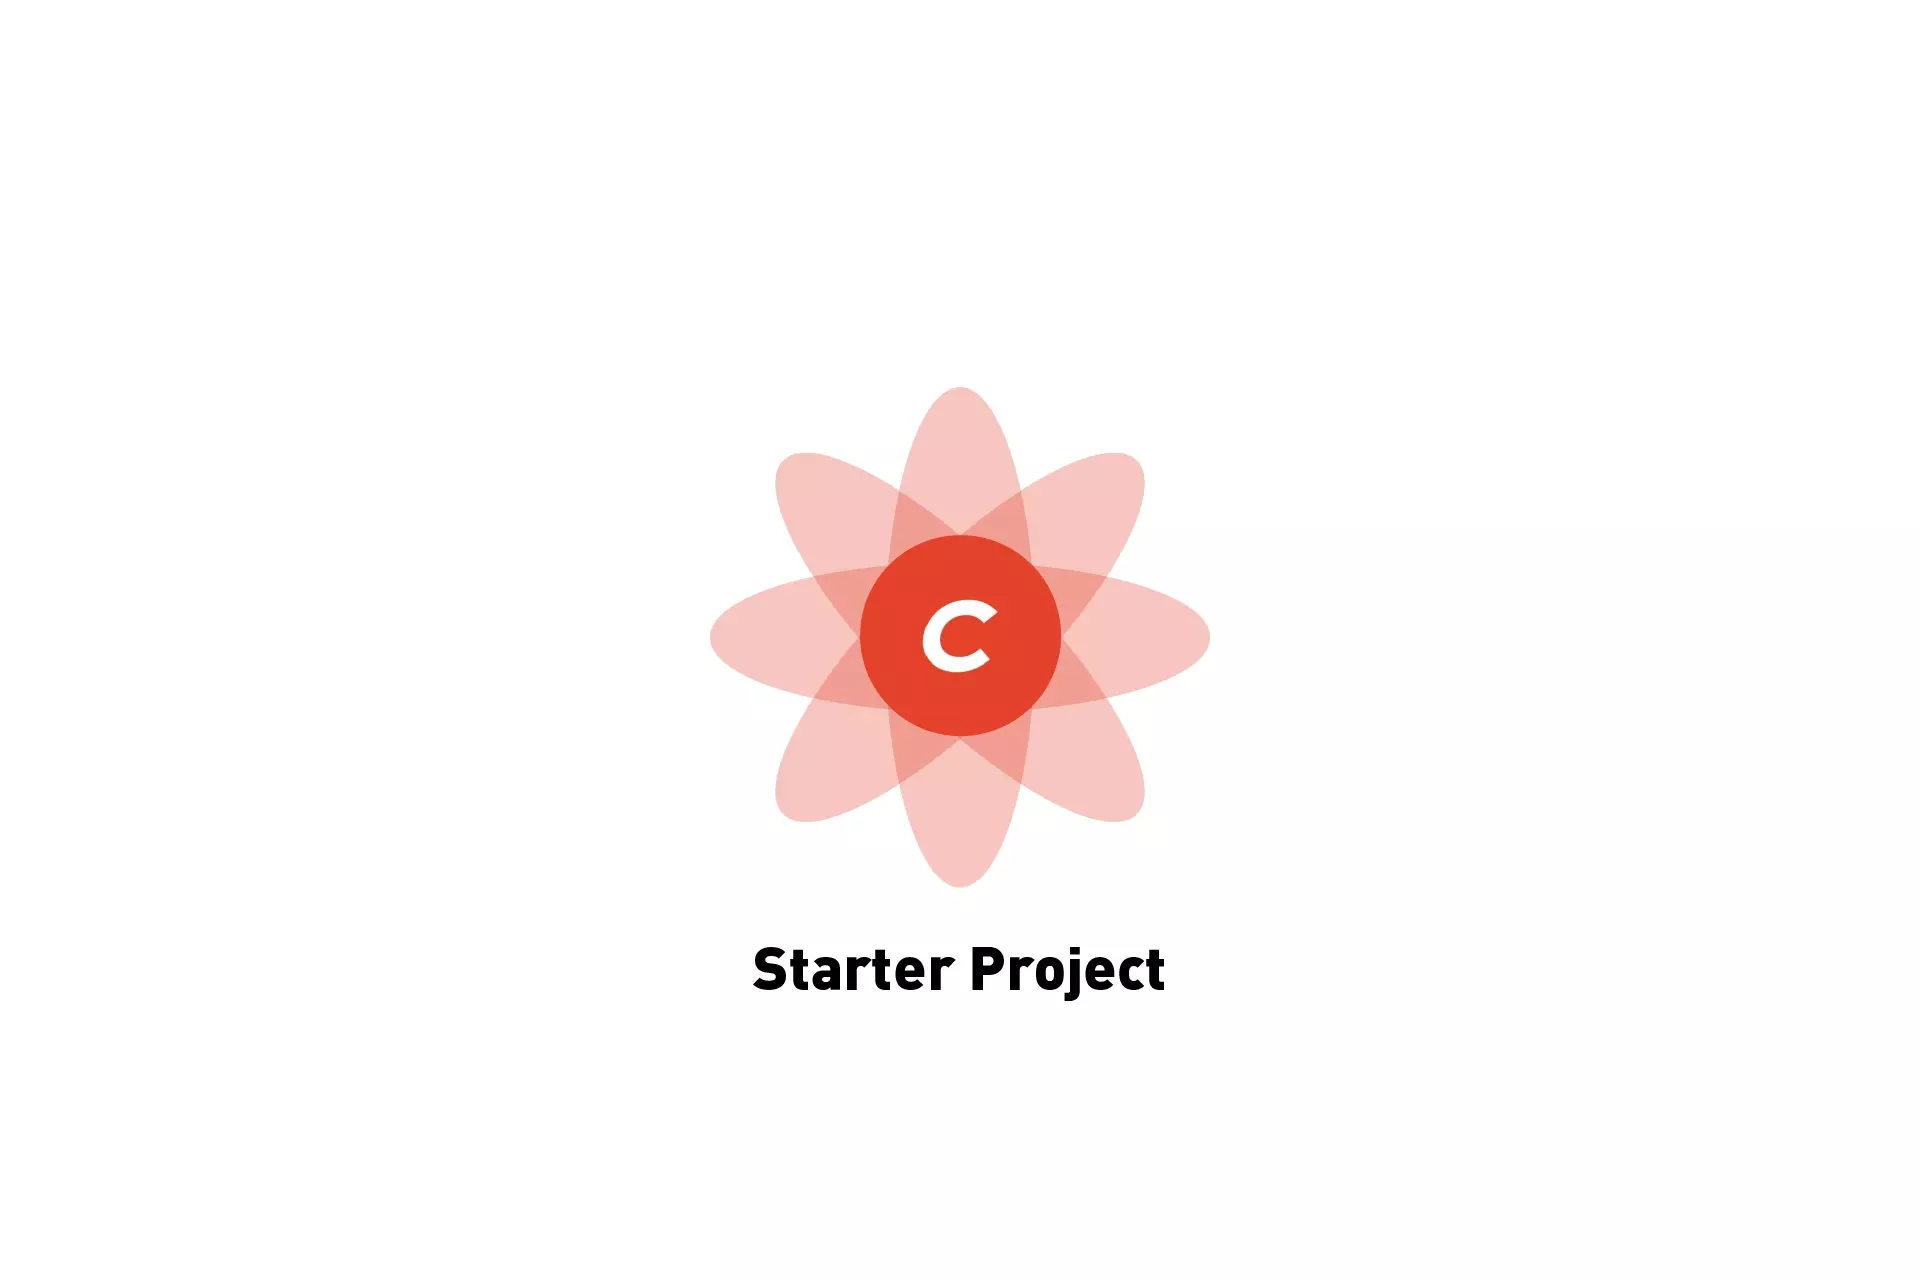 A flower that represents Craft CMS. Beneath it sits the text "Starter Project."